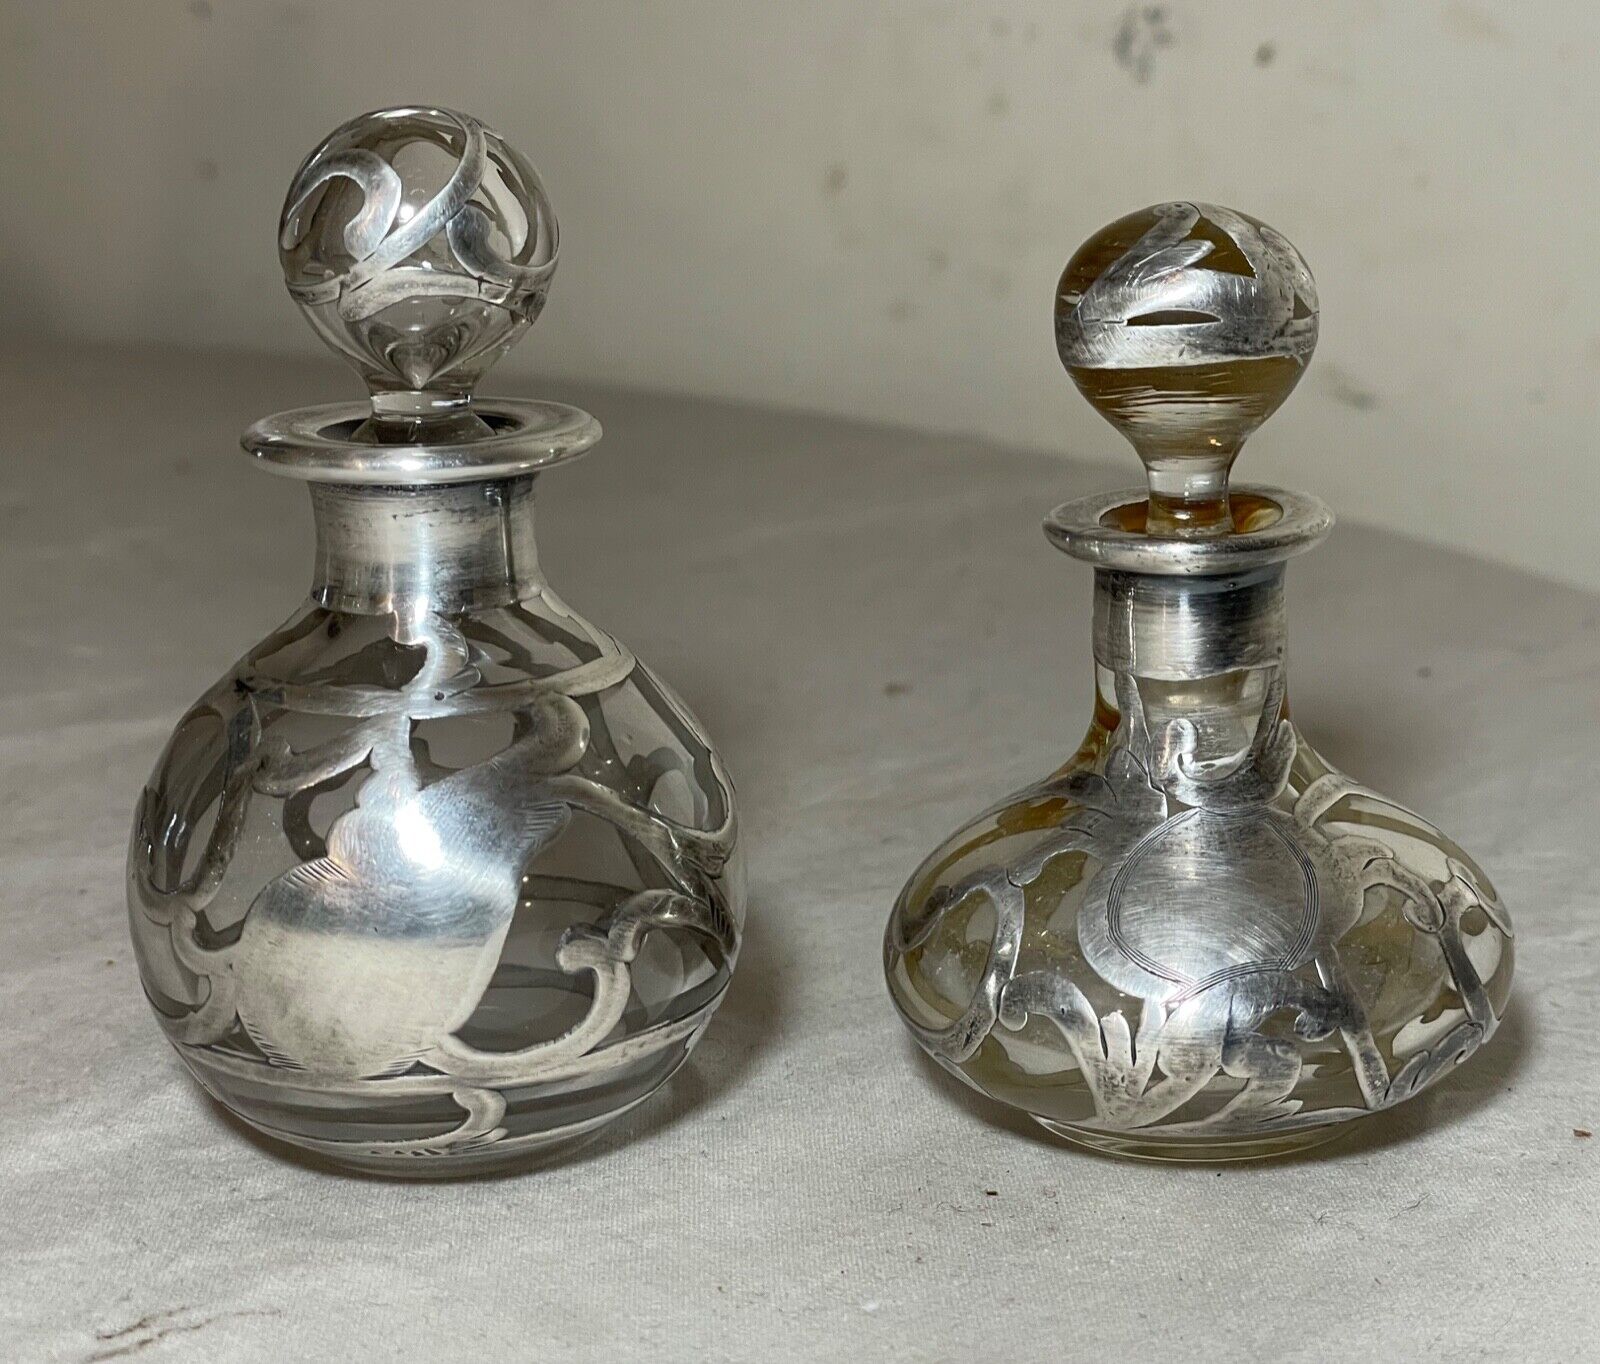 Pair of antique fine sterling silver overlay perfume scent cologne bottle jar